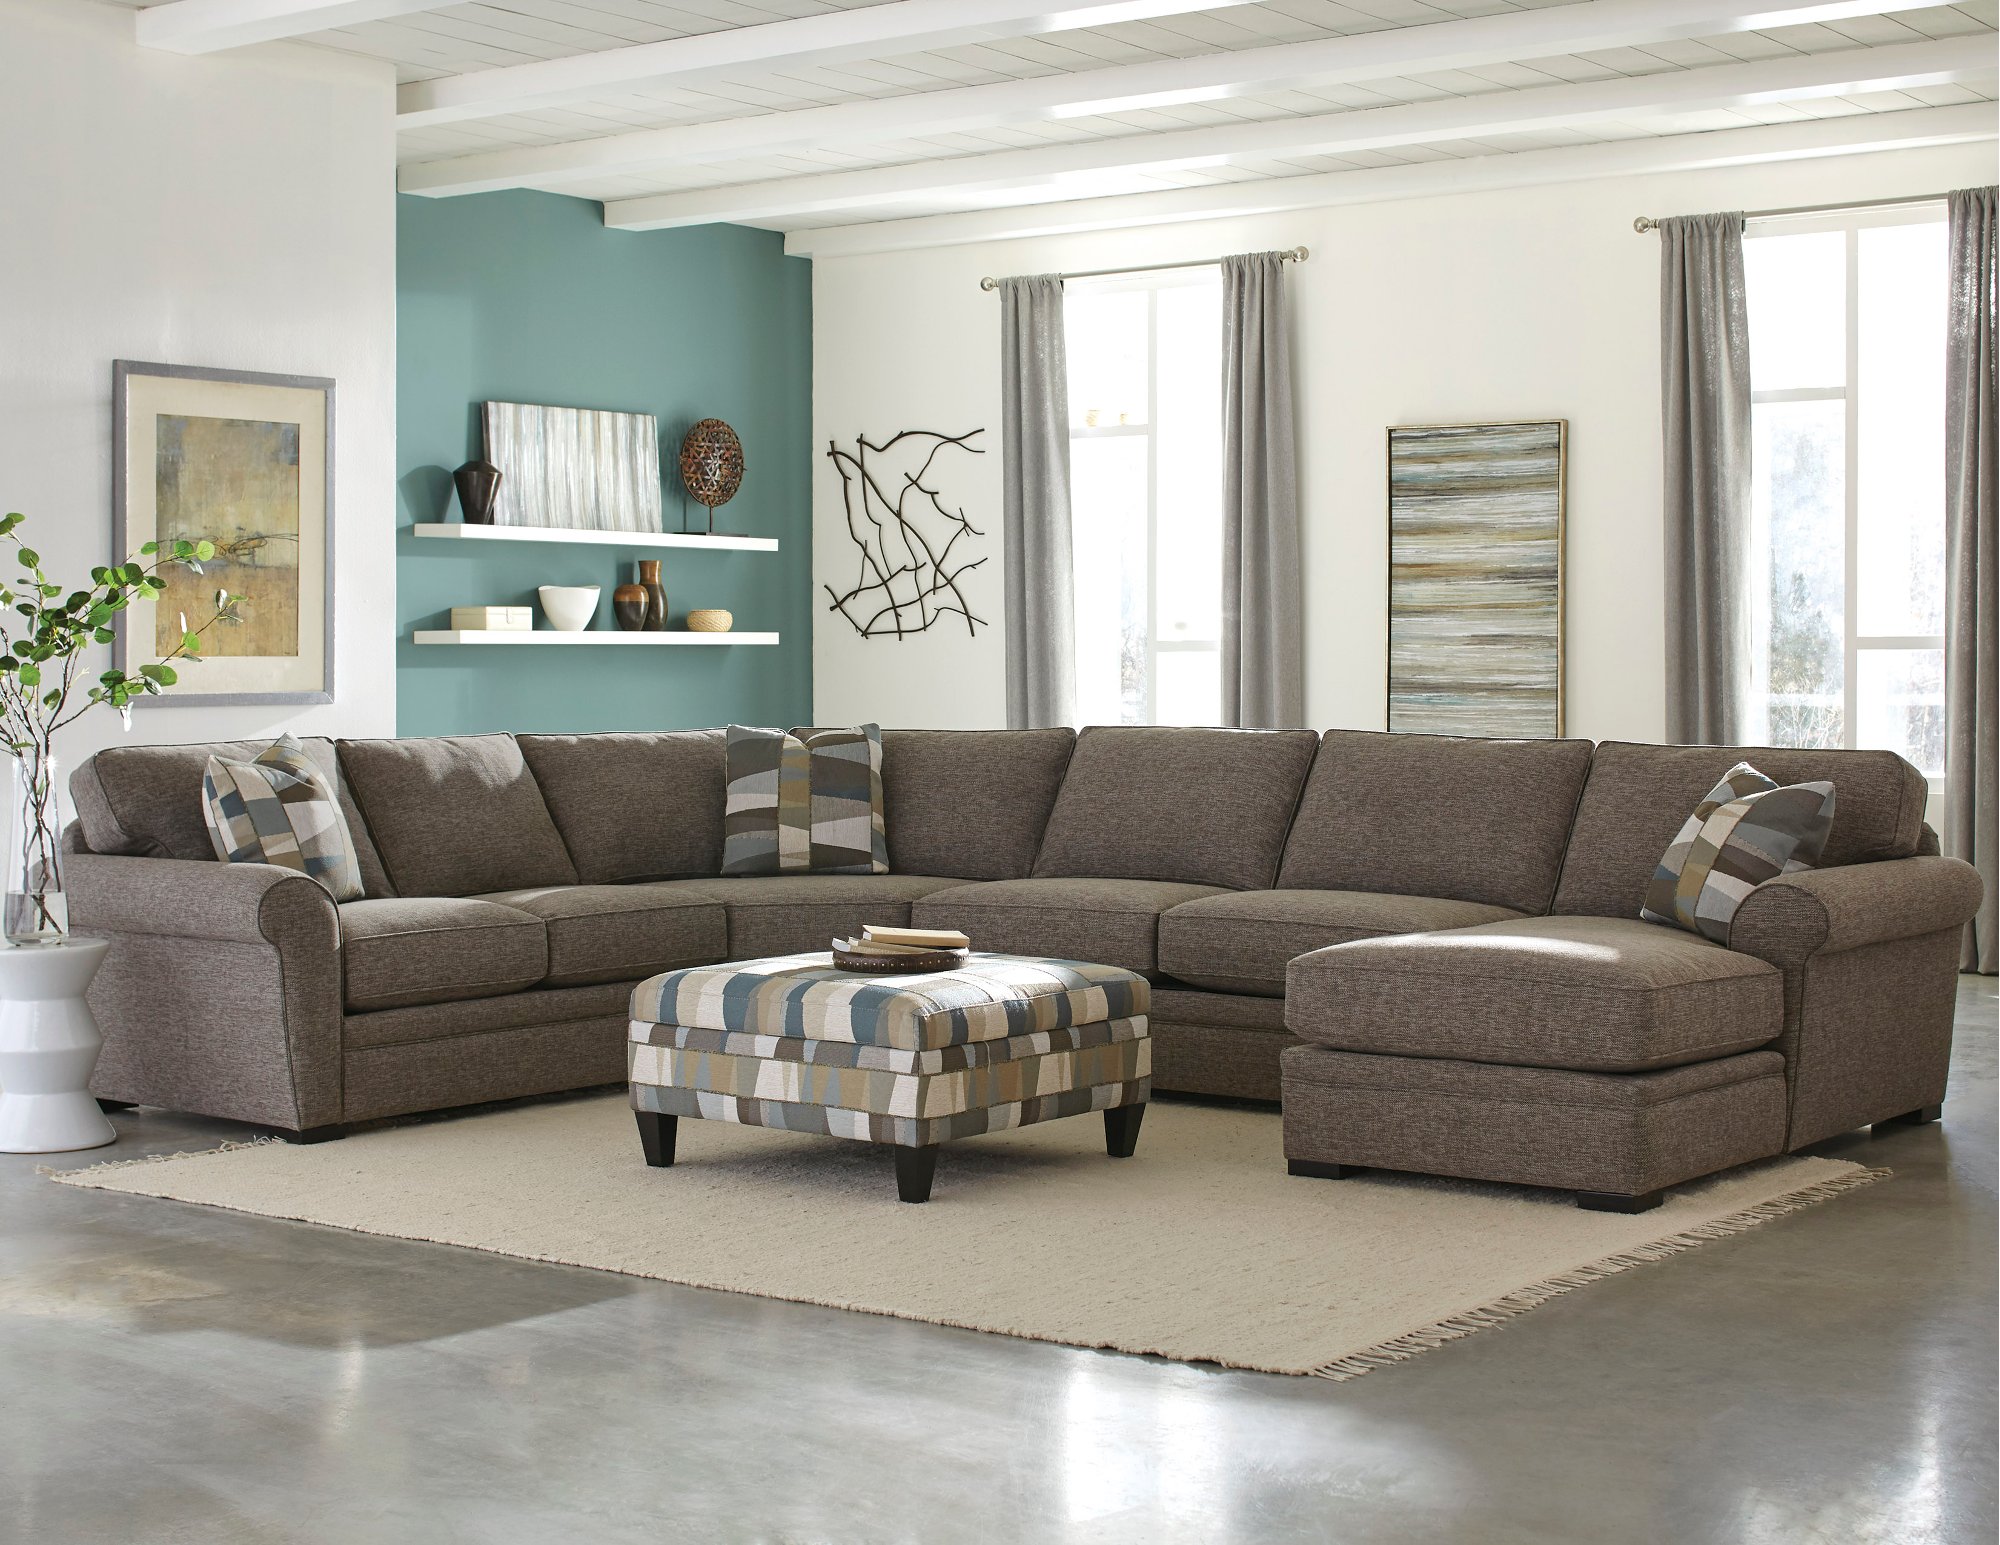 Brown 4 Piece Sectional Sofa With RAF Chaise Orion Rcwilley Image1 